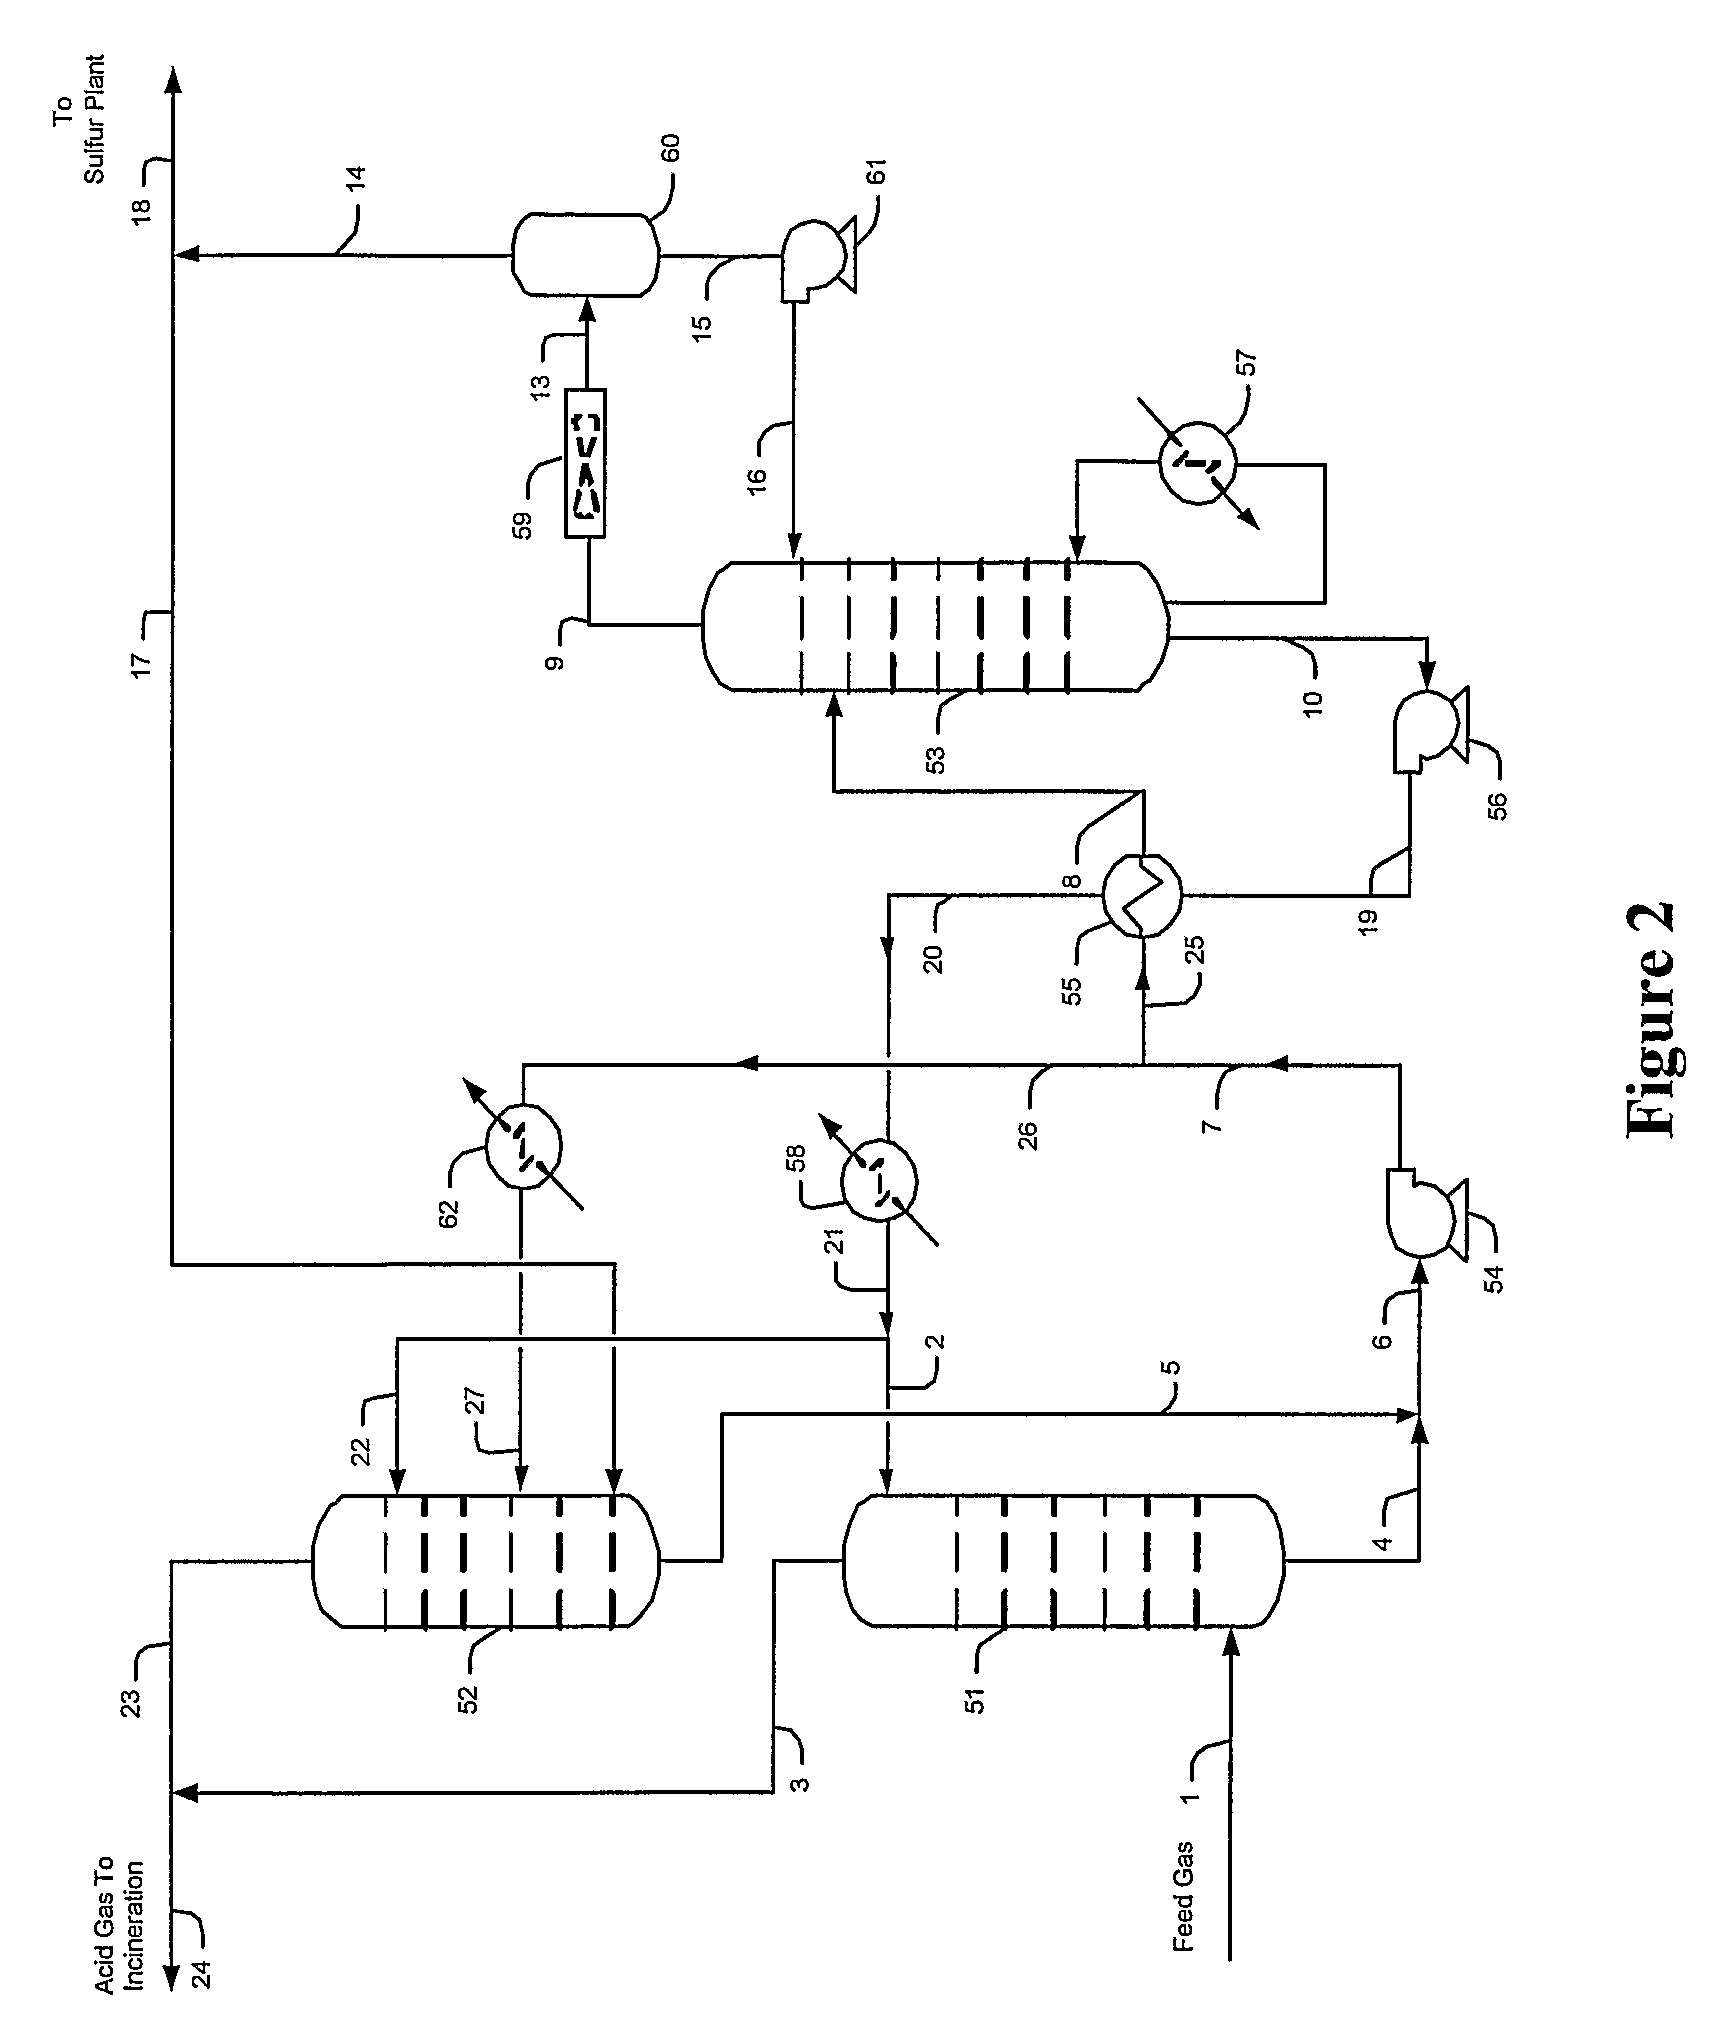 Methods and configurations for acid gas enrichment